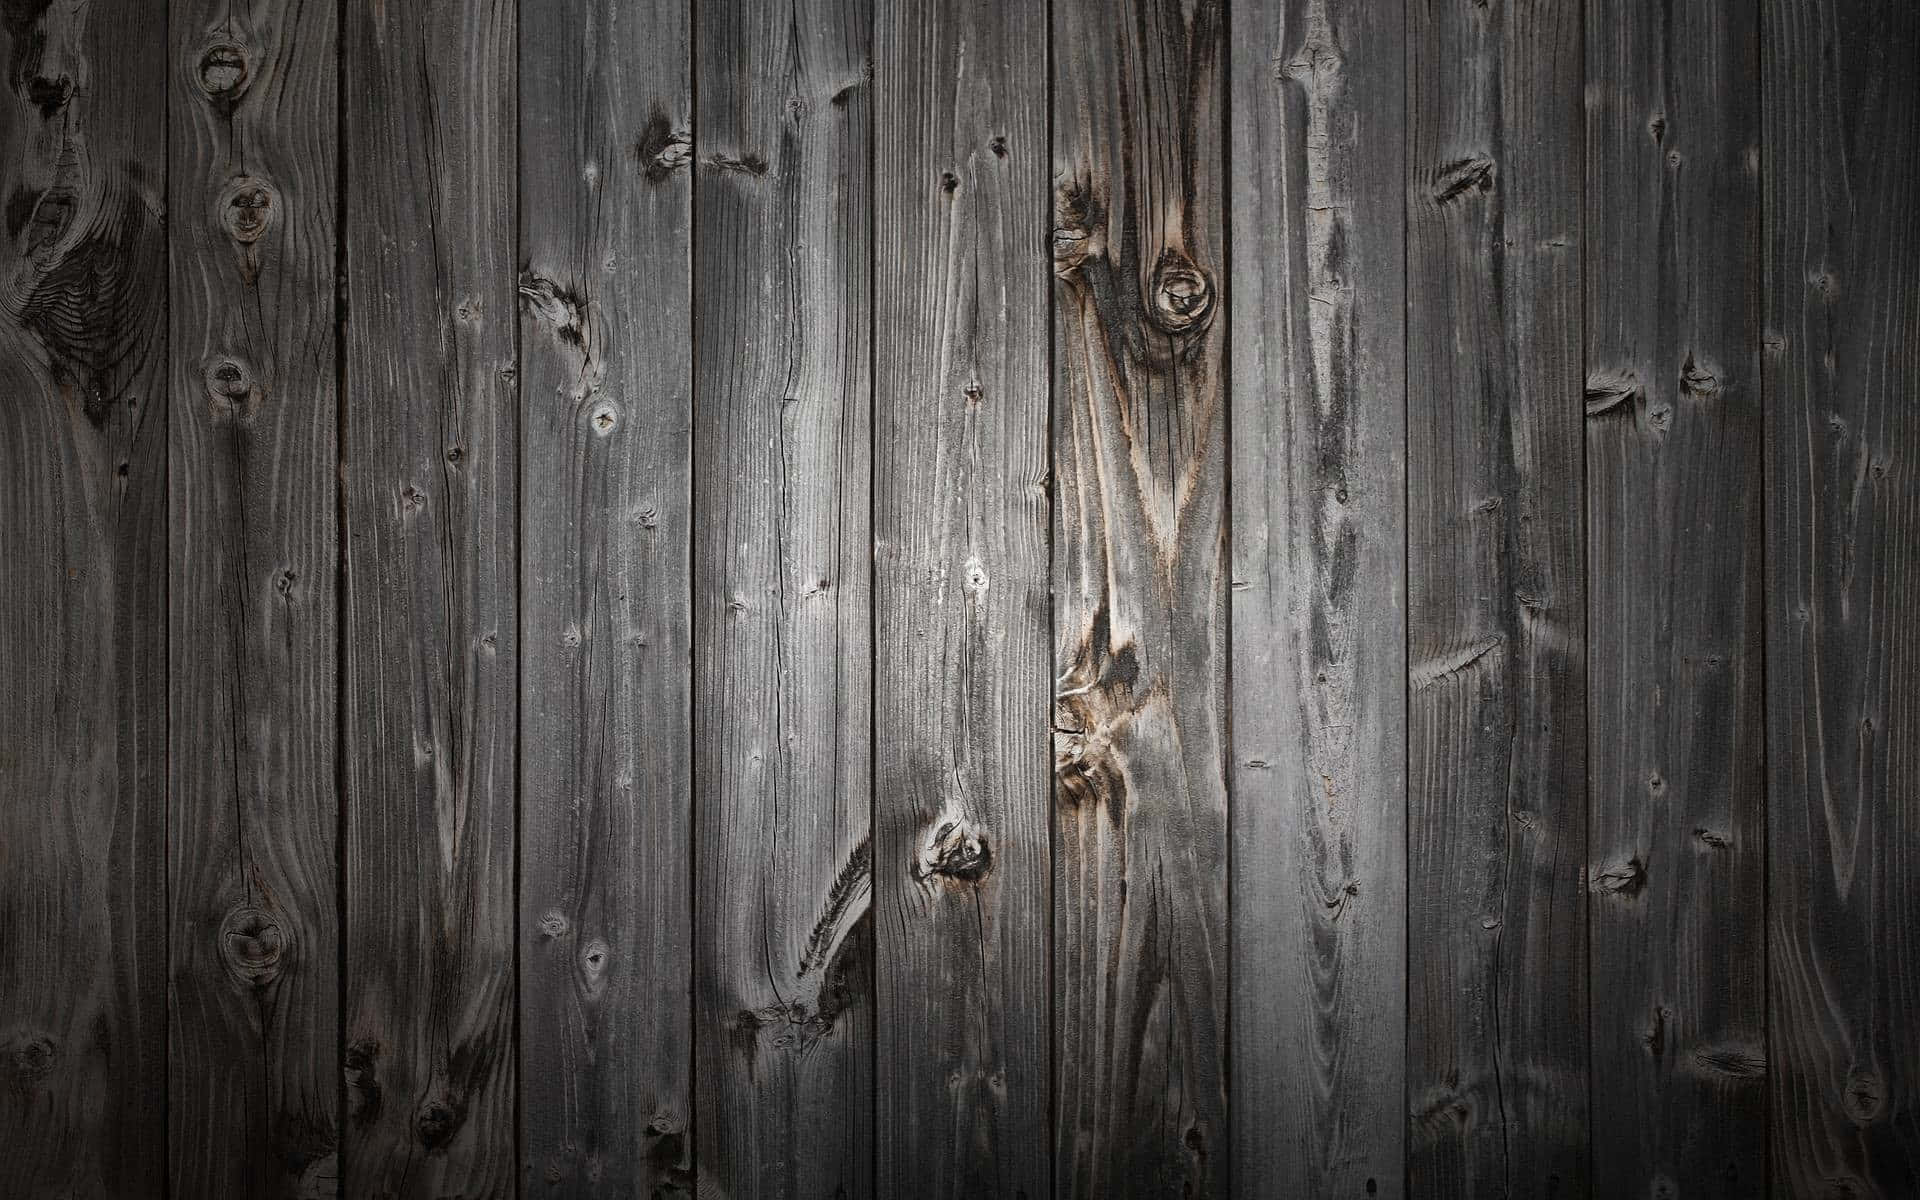 A Close Up Of A Wooden Wall With Dark Paint